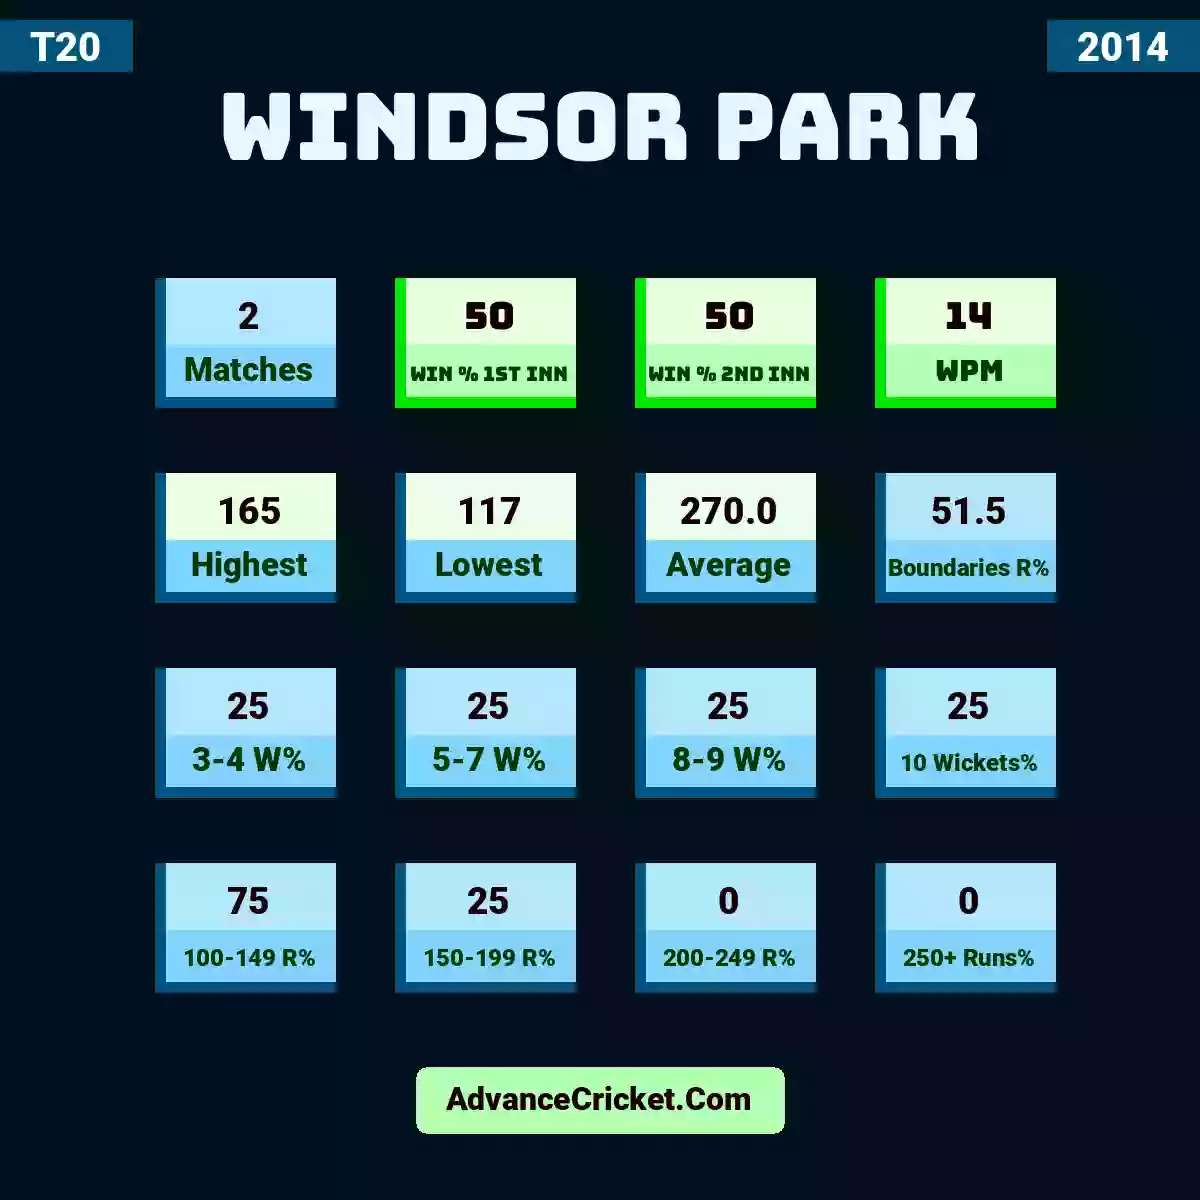 Image showing Windsor Park with Matches: 2, Win % 1st Inn: 50, Win % 2nd Inn: 50, WPM: 14, Highest: 165, Lowest: 117, Average: 270.0, Boundaries R%: 51.5, 3-4 W%: 25, 5-7 W%: 25, 8-9 W%: 25, 10 Wickets%: 25, 100-149 R%: 75, 150-199 R%: 25, 200-249 R%: 0, 250+ Runs%: 0.